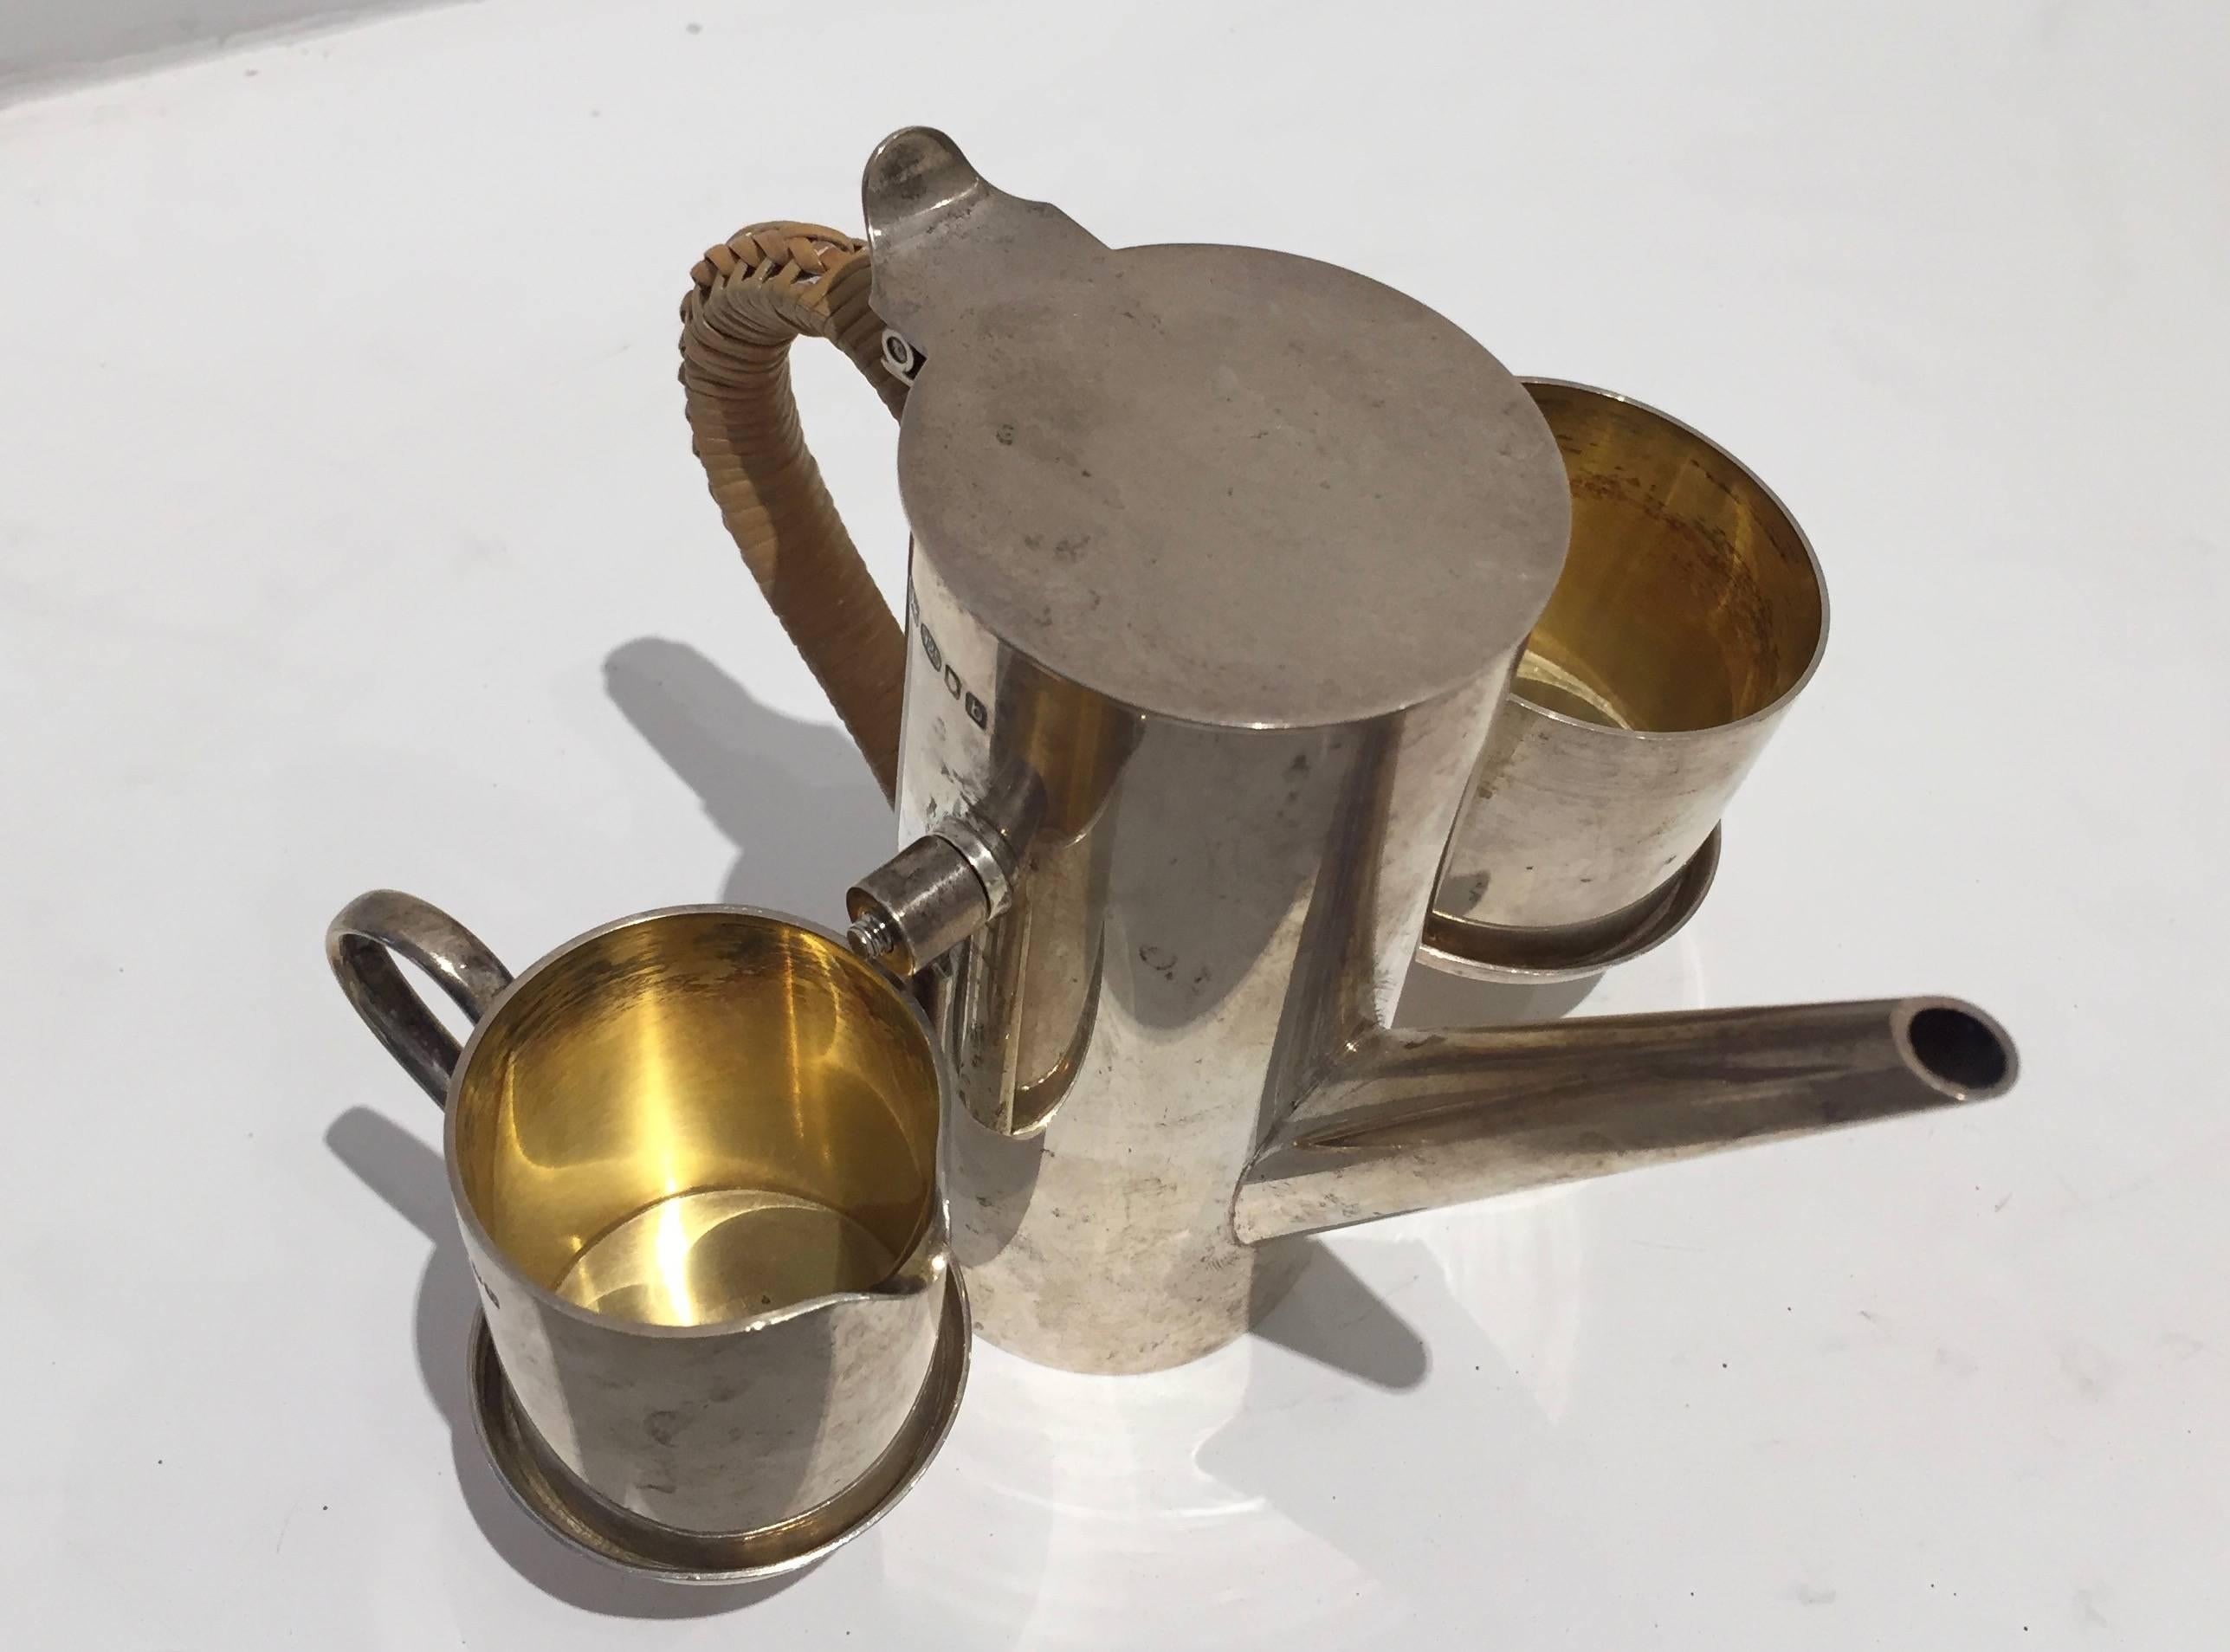 Chic modern travel coffee service with cup and creamer. Arms hold the set together and rotates so the pieces stay in place as you pour. Cane-wrapped handle. Fully hallmarked Asprey and sterling, with date letter indicating 1957.